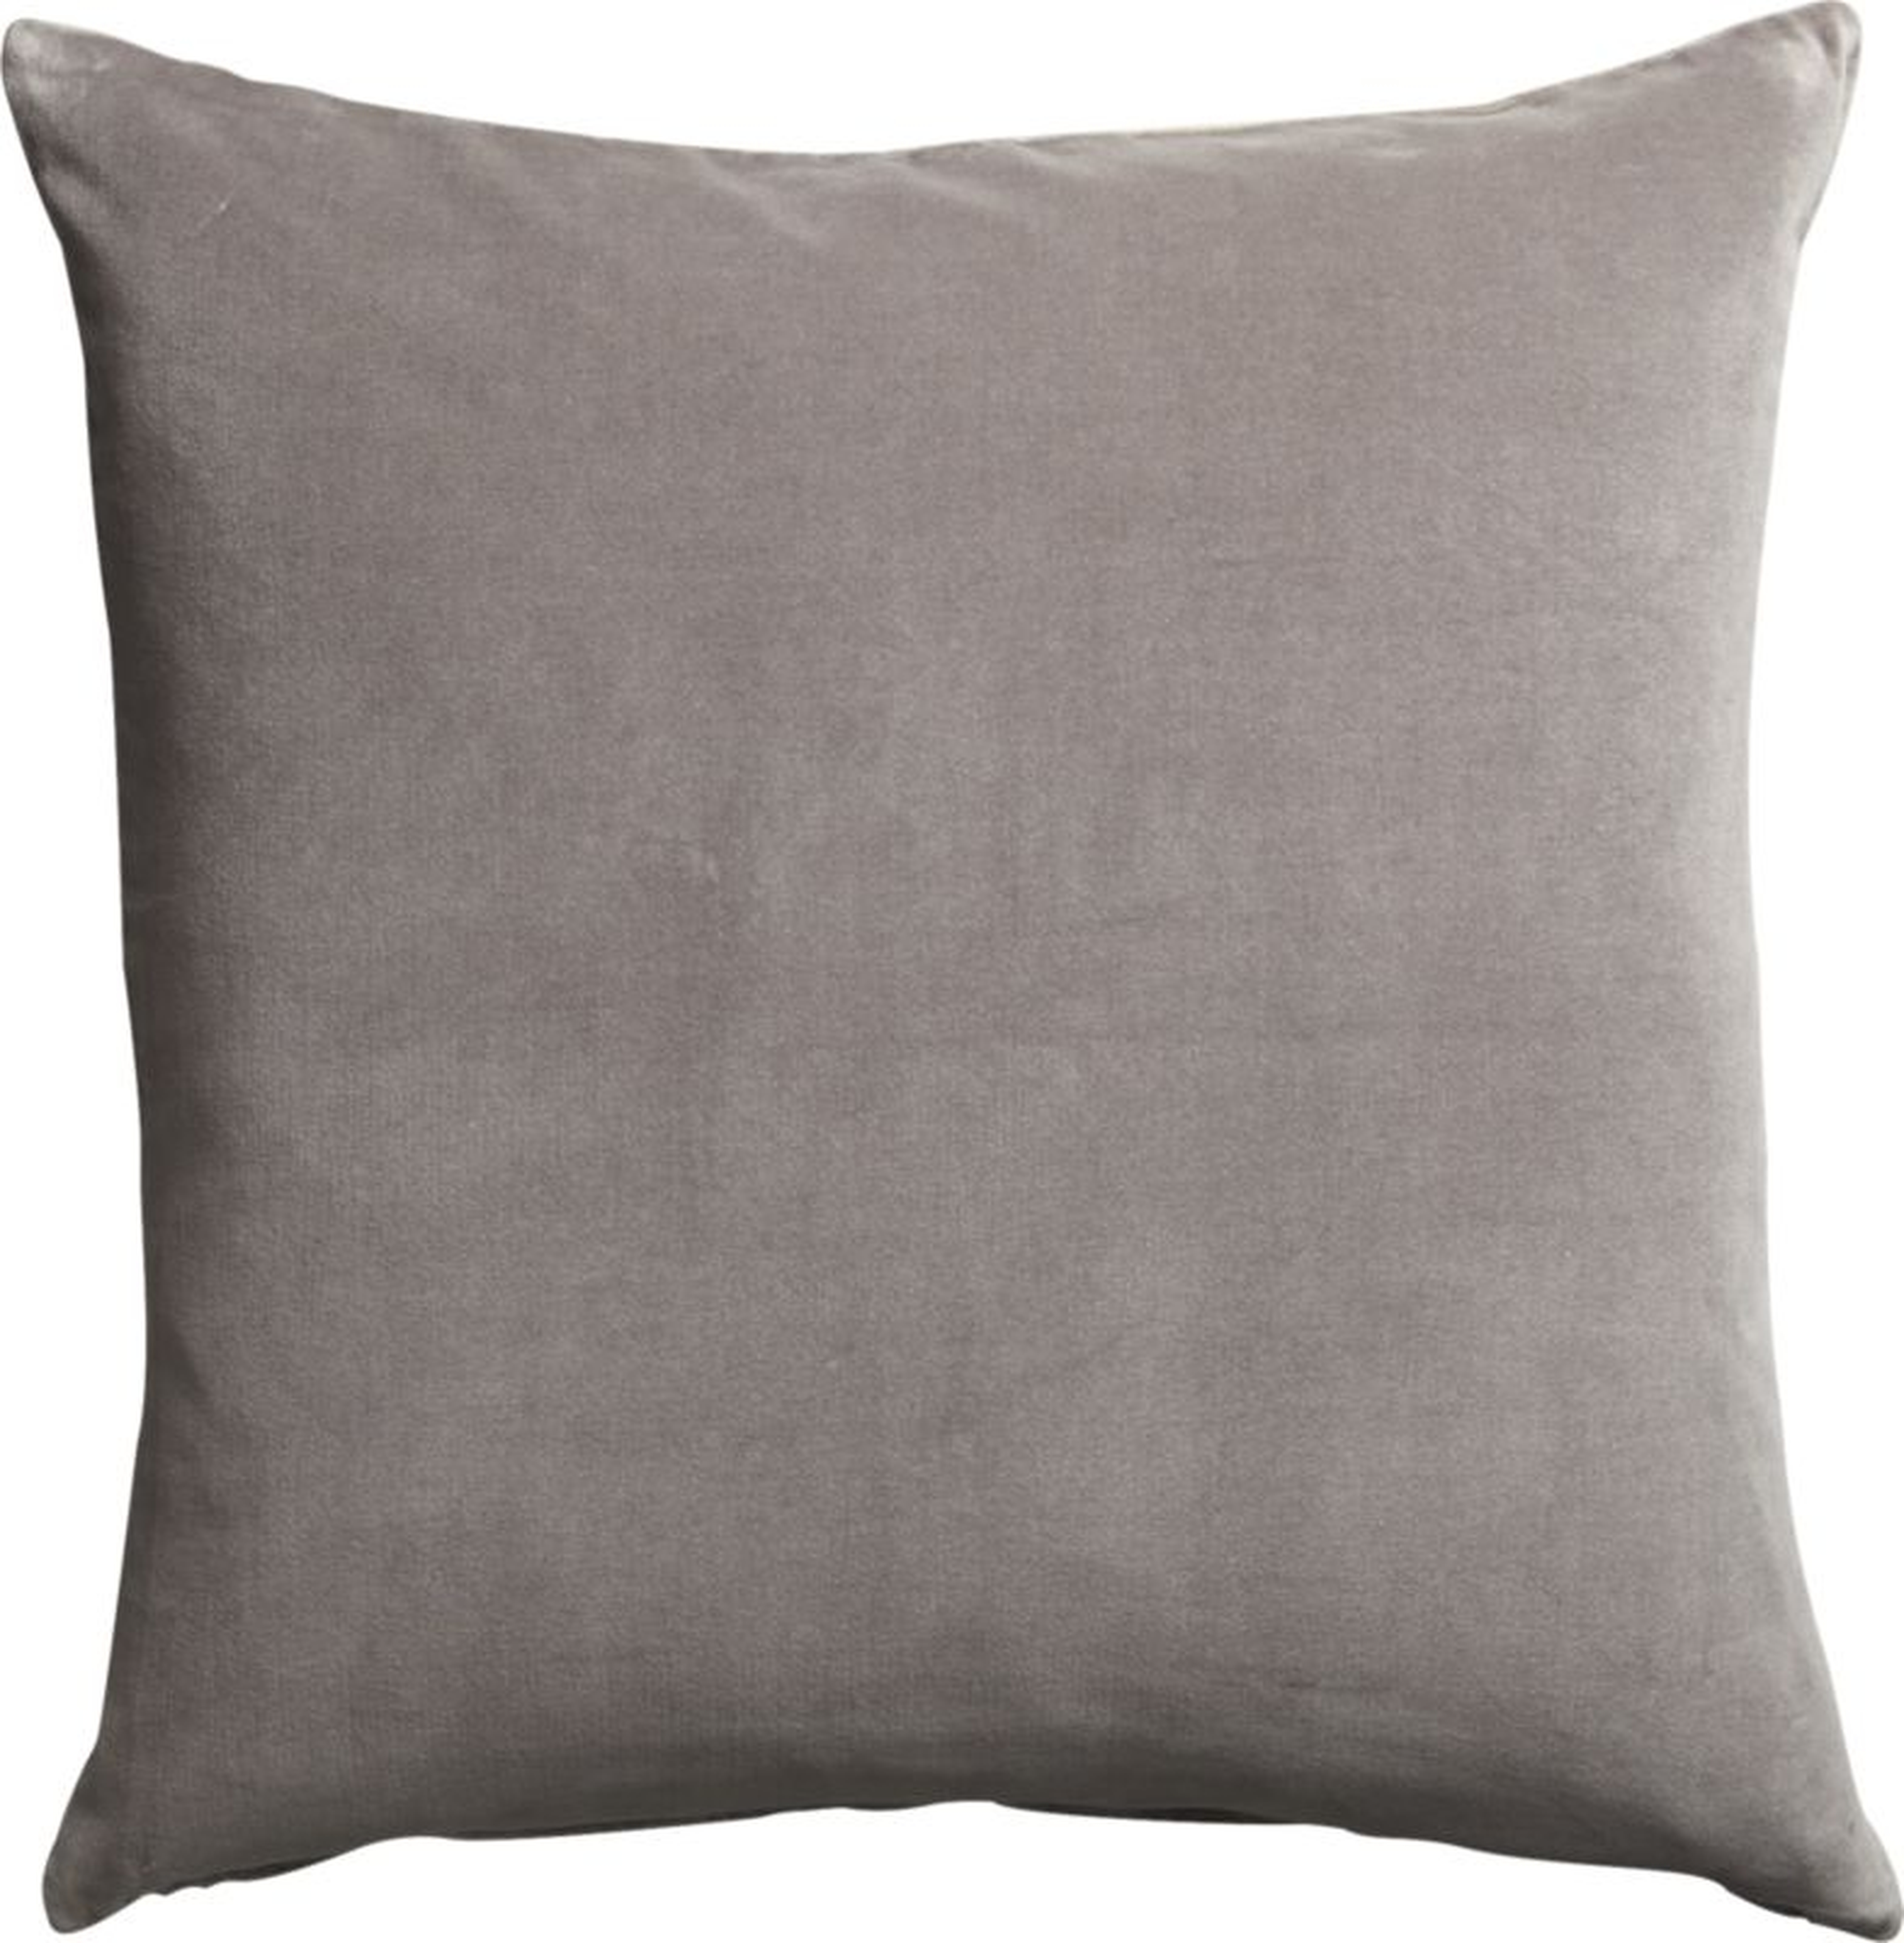 "23"" leisure grey pillow with feather-down insert" - CB2